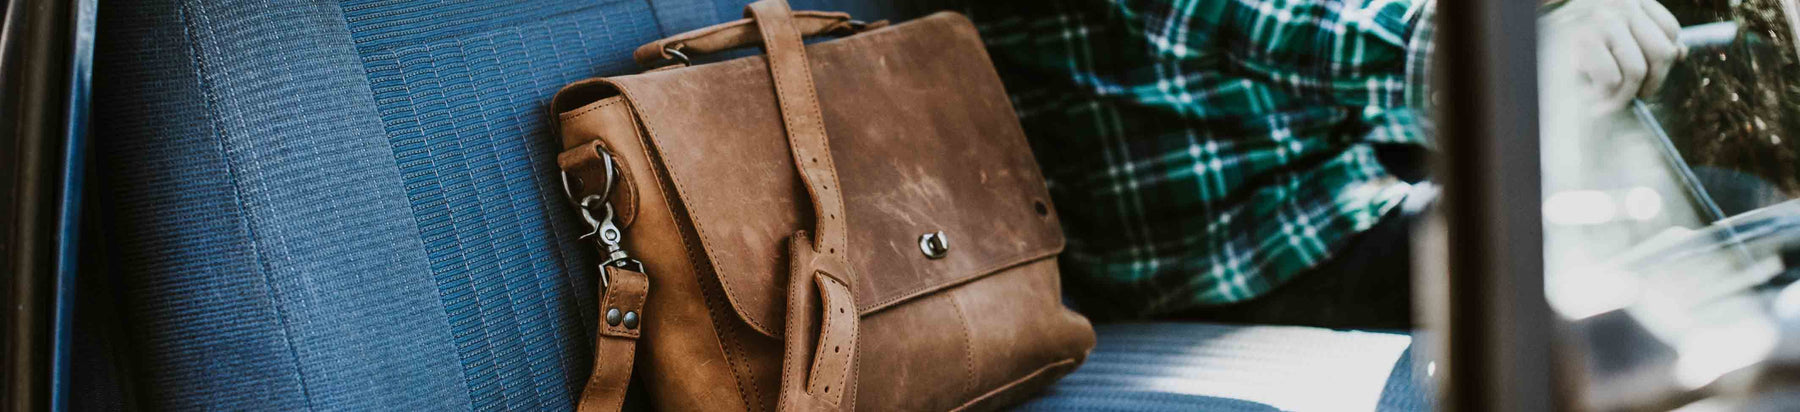 Leather Messenger Bags for Men | Shoulder & Carrying Bags – The Real Leather  Company